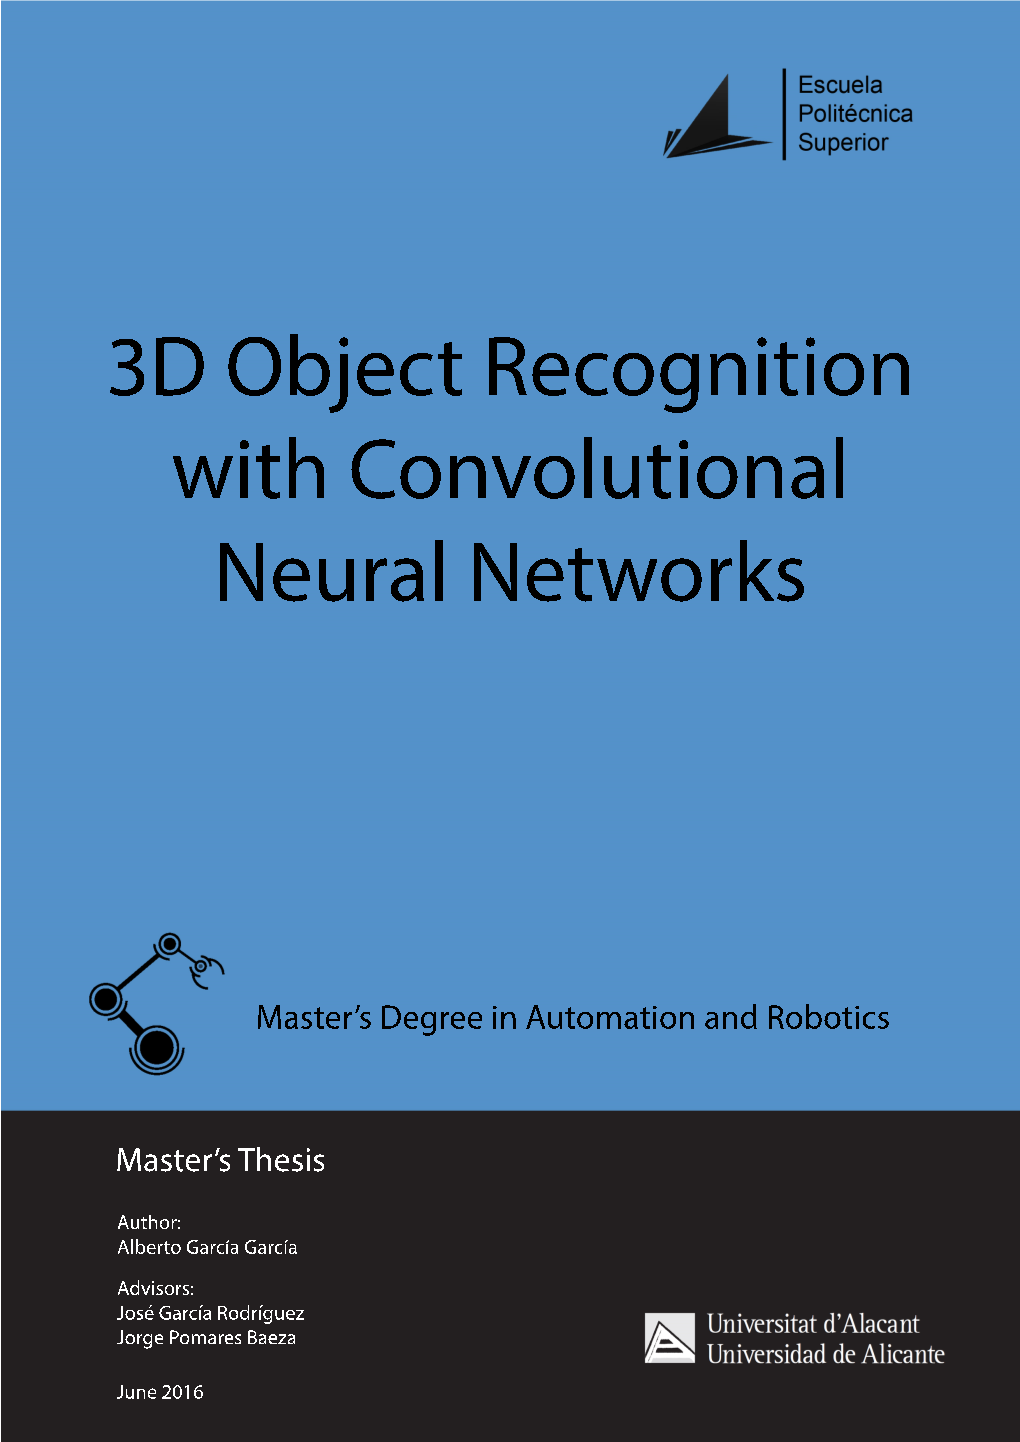 3D Object Recognition with Convolutional Neural Networks